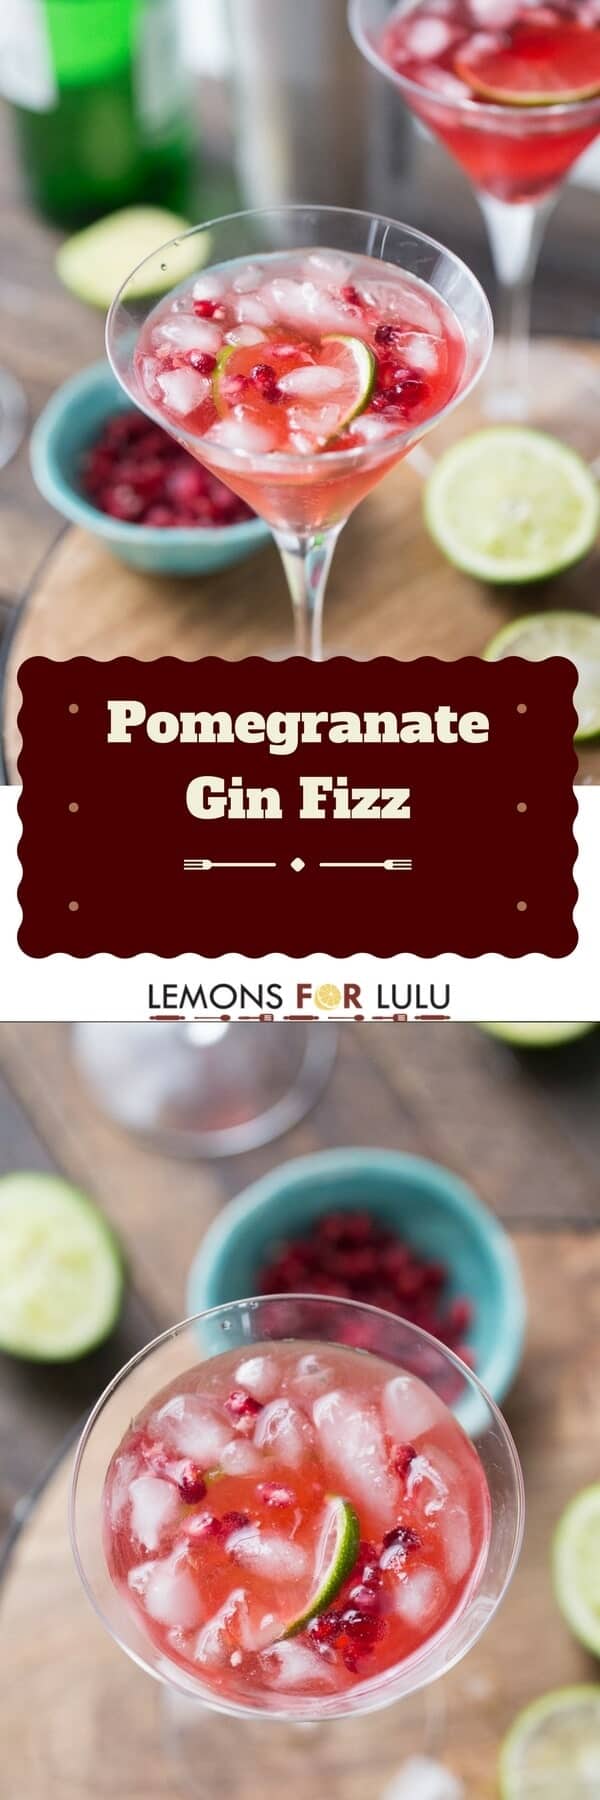 This gin fizz recipe has such deep, intense flavor! The pomegranate juice is lightly sweetened then freshened with lime juice! This is one sophisticated cocktail!